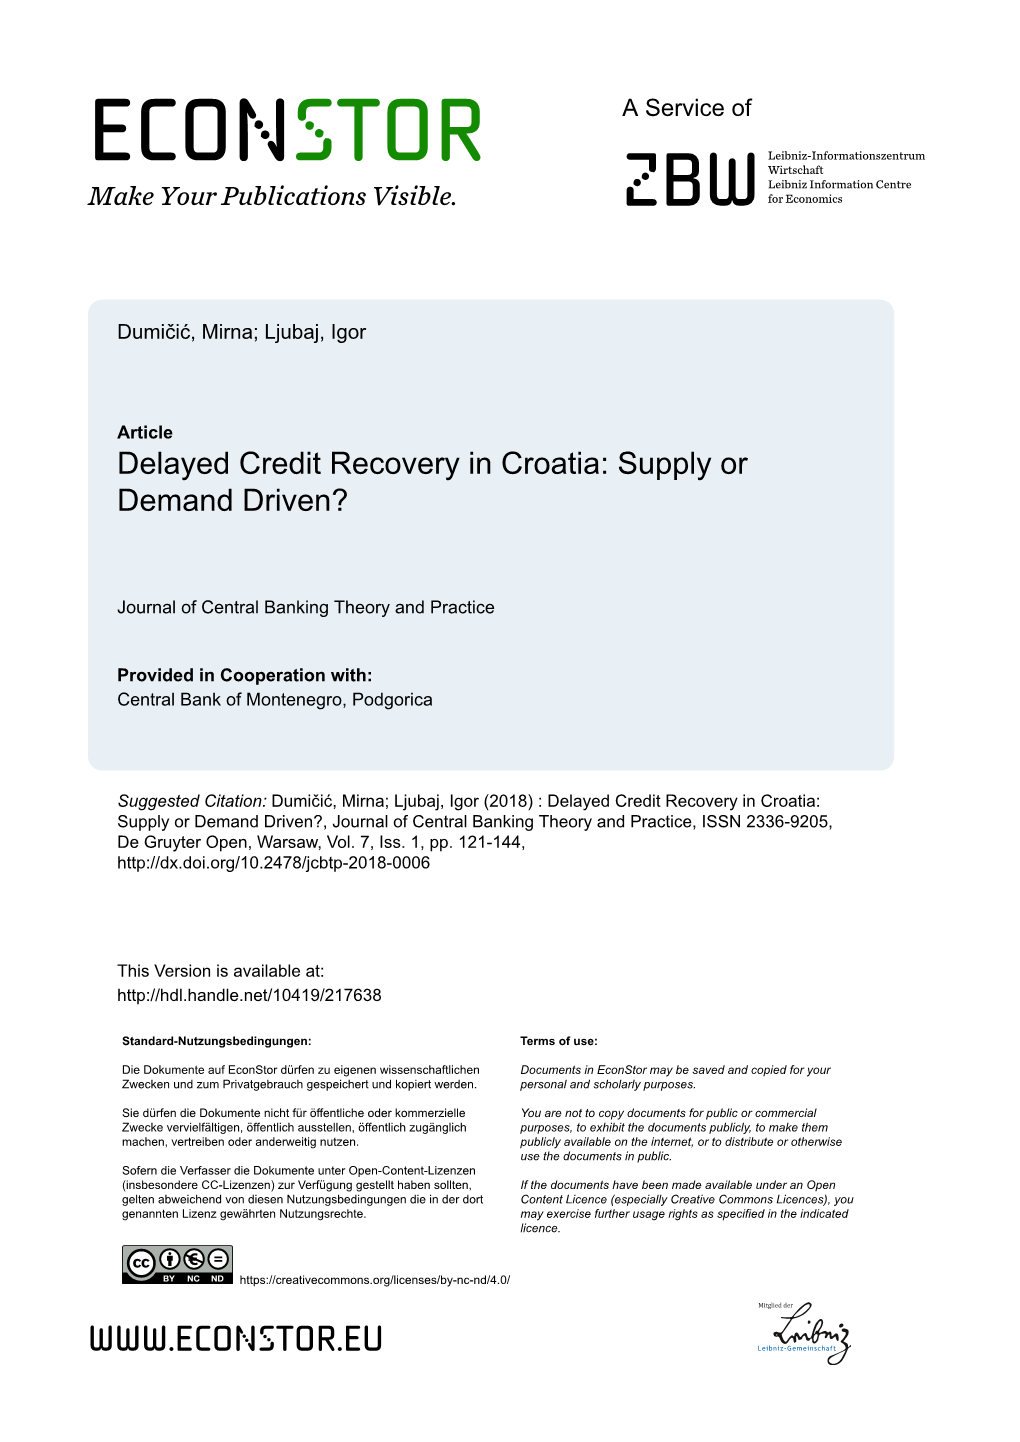 Delayed Credit Recovery in Croatia: Supply Or Demand Driven?